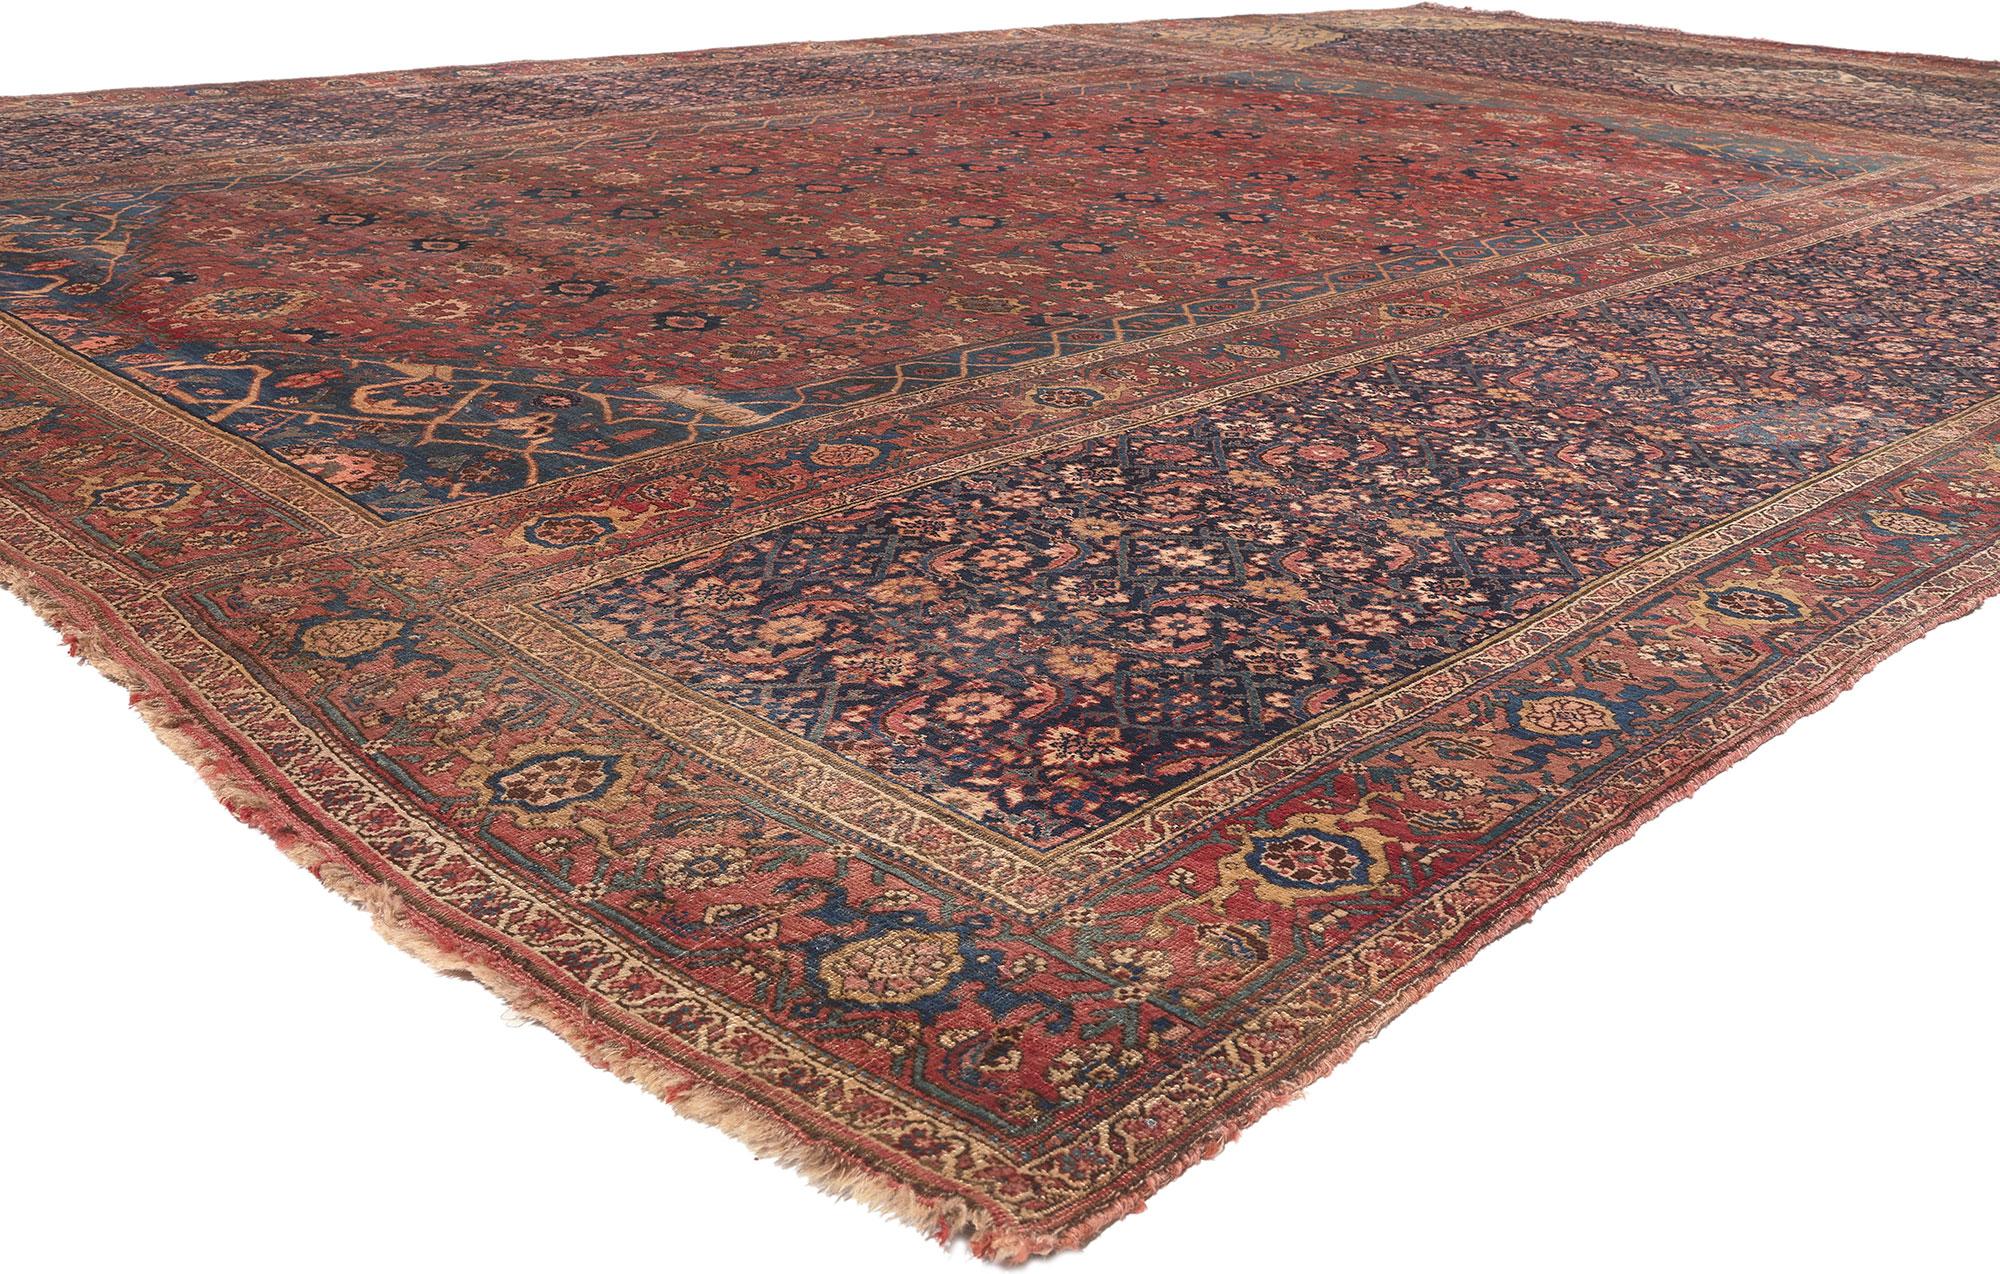 78569 Antique Persian Bijar Triclinium Rug, 12'03 x 19'10. 
Representing an exclusive category of Persian carpets and a sign of wealth, this palatial antique Bijar Triclinium rug is a captivating vision of woven beauty. The meticulous details and